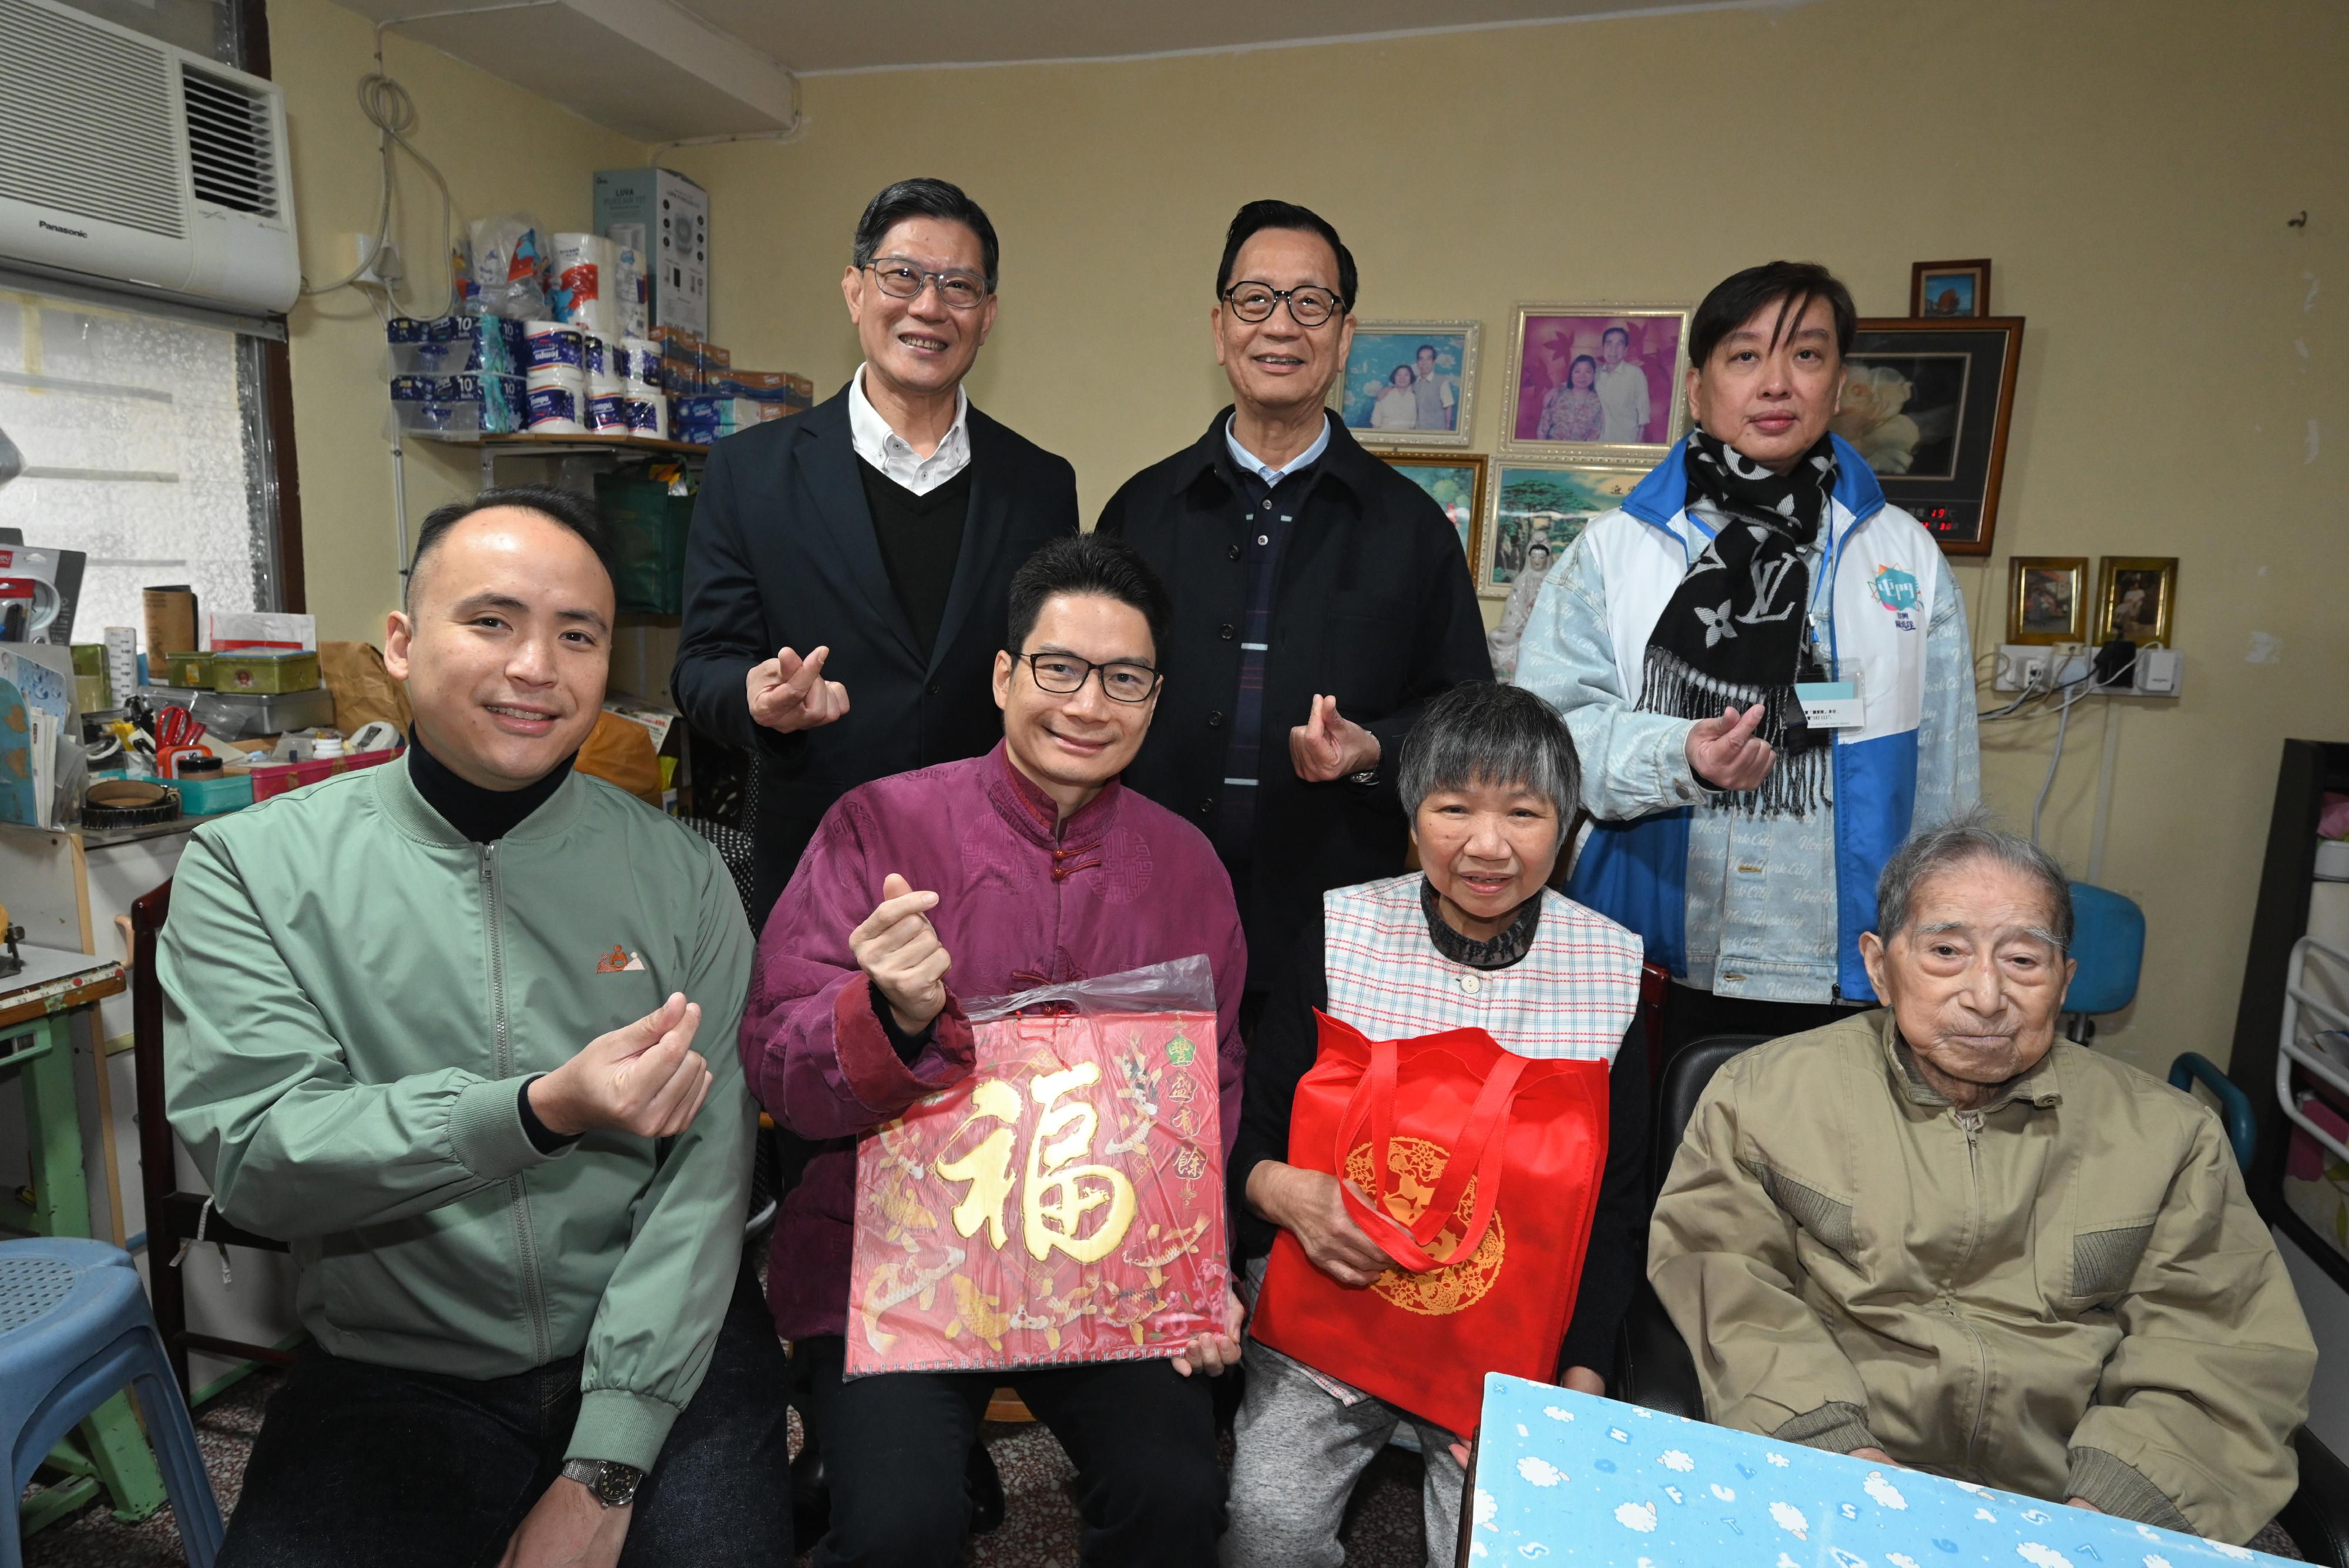 The Acting Secretary for Financial Services and the Treasury, Mr Joseph Chan, today (February 9) visited elderly couples and singletons living in Tai Hing Estate, Tuen Mun, and distributed blessing bags in celebration of the Chinese New Year. Photo shows Mr Chan (front row, second left), together with the District Officer (Tuen Mun), Mr Michael Kwan (front row, first left), Tuen Mun District Council members and representatives from the Care Team (Tuen Mun), visiting an elderly couple in Tai Hing Estate.